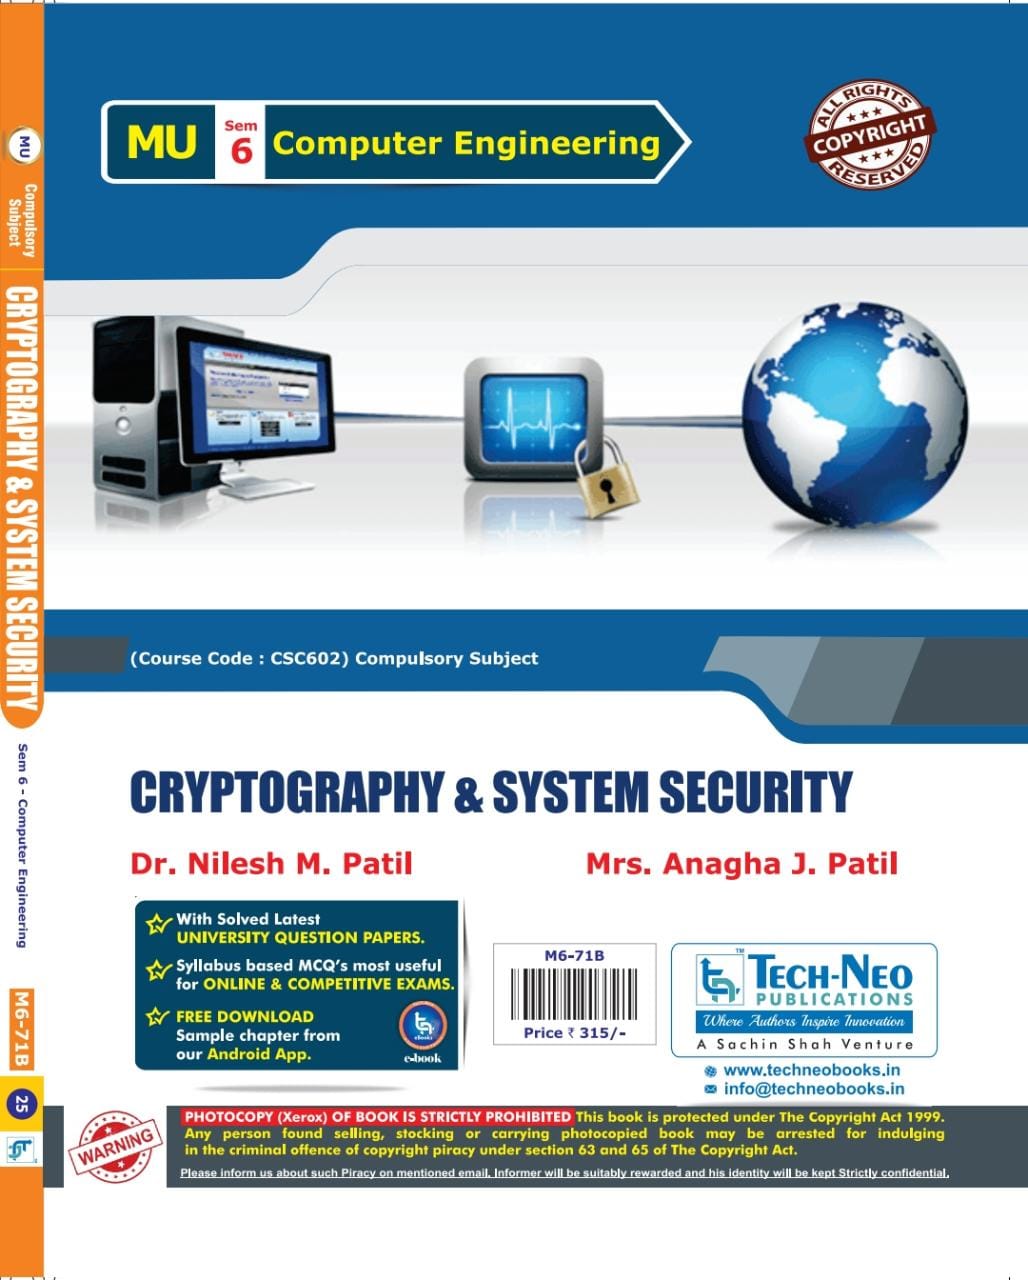 Cryptography & System Security